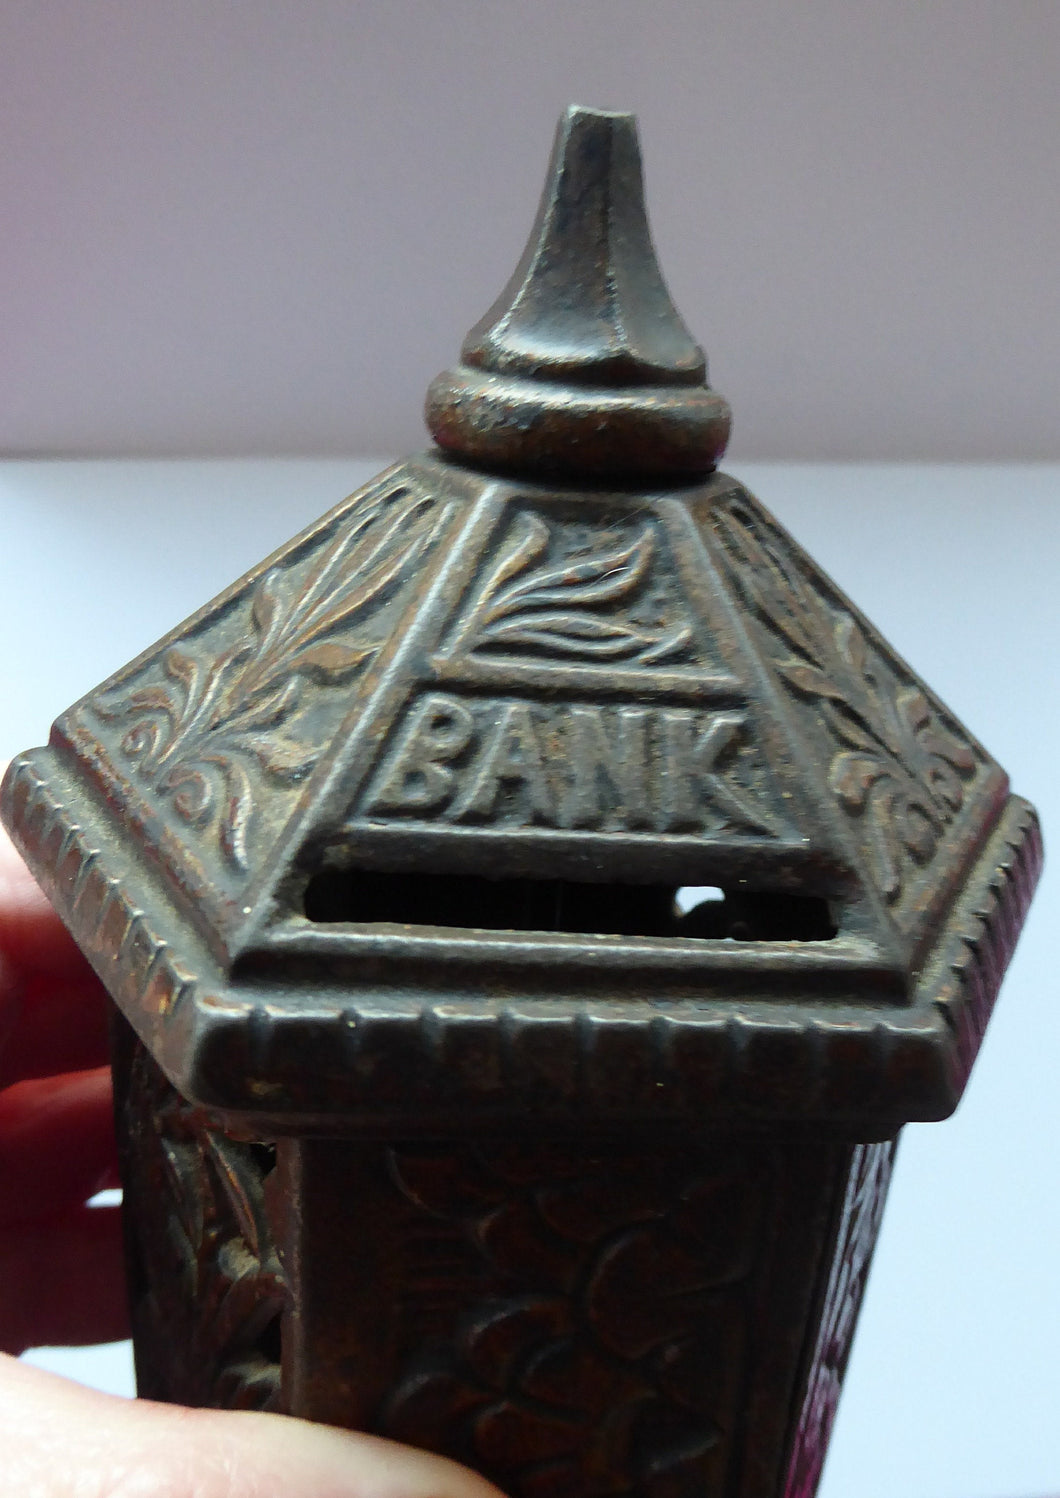 Antique Money Box or Savings Bank. Rare CAST IRON VICTORIAN Example by Chamberlain & Hill